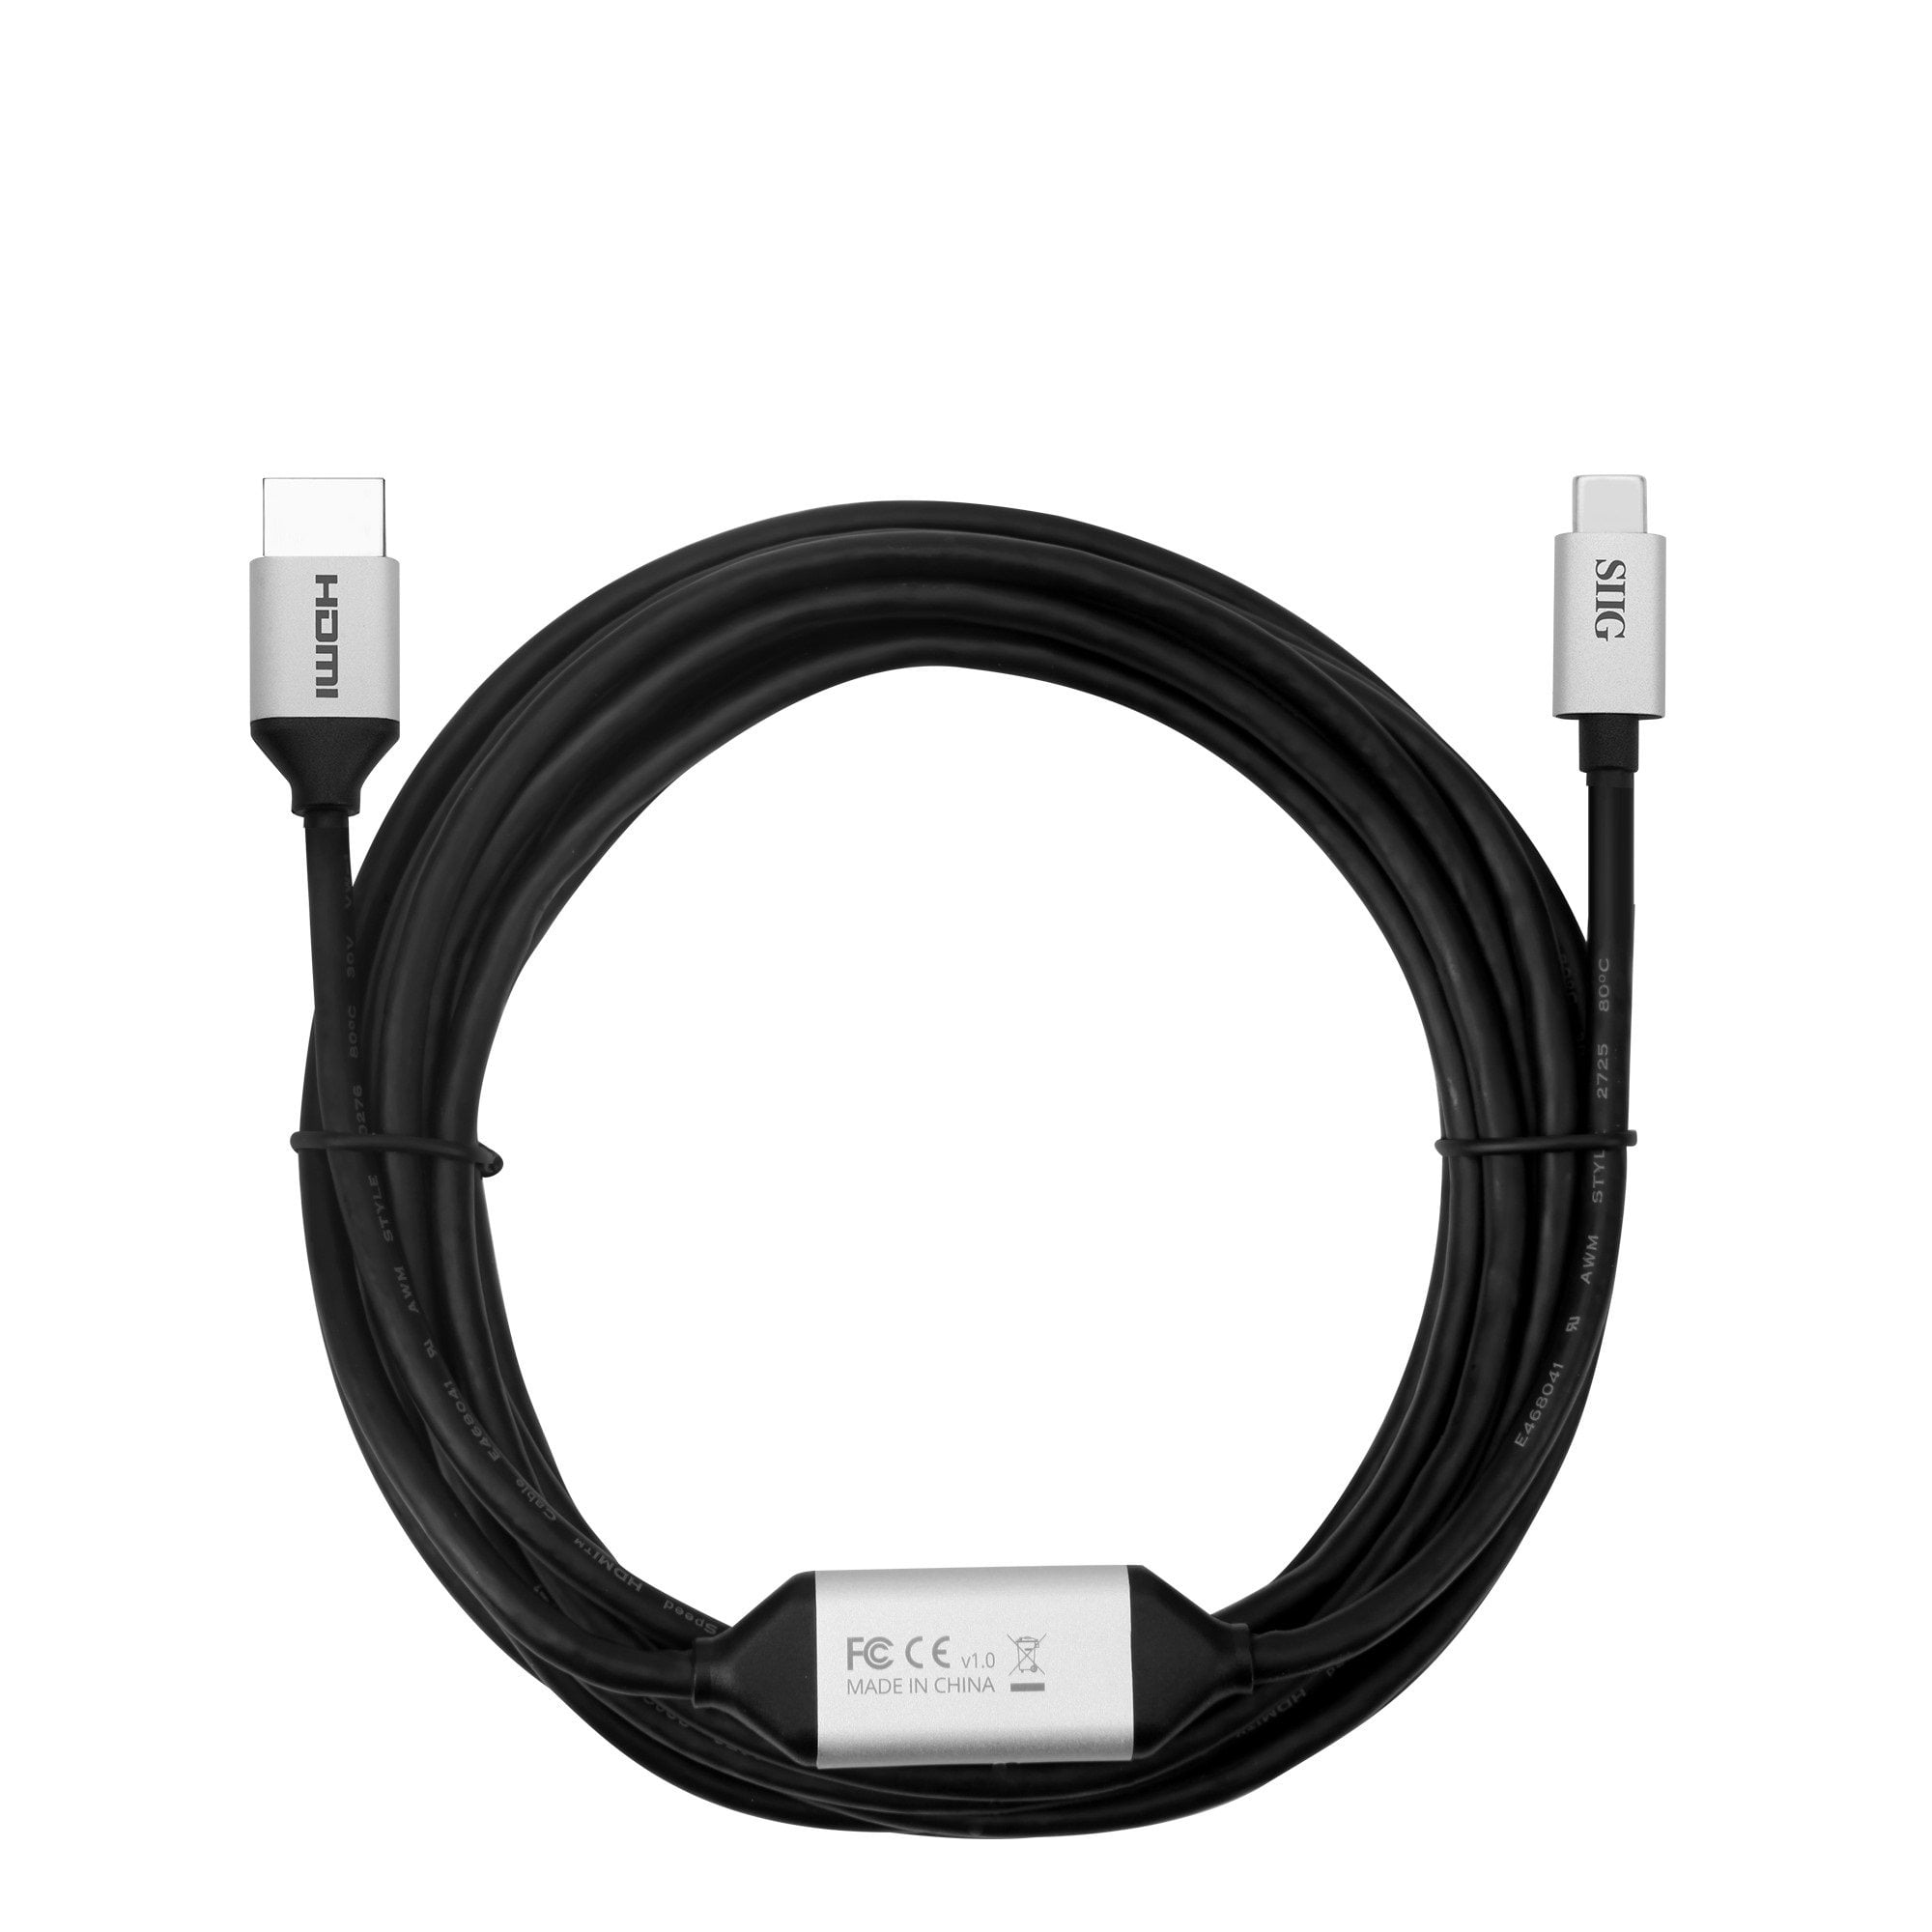 USB-C to USB-C USB-IF Certified Thunderbolt 3 Port Compatible for MacBook Pro and Other Type-C Devices 3.3ft SIIG USB 3.1 Type-C Gen 2 Cable 4K60Hz 60W PD 10Gbps Transfer Rate Black CB-TC0E11-S1 